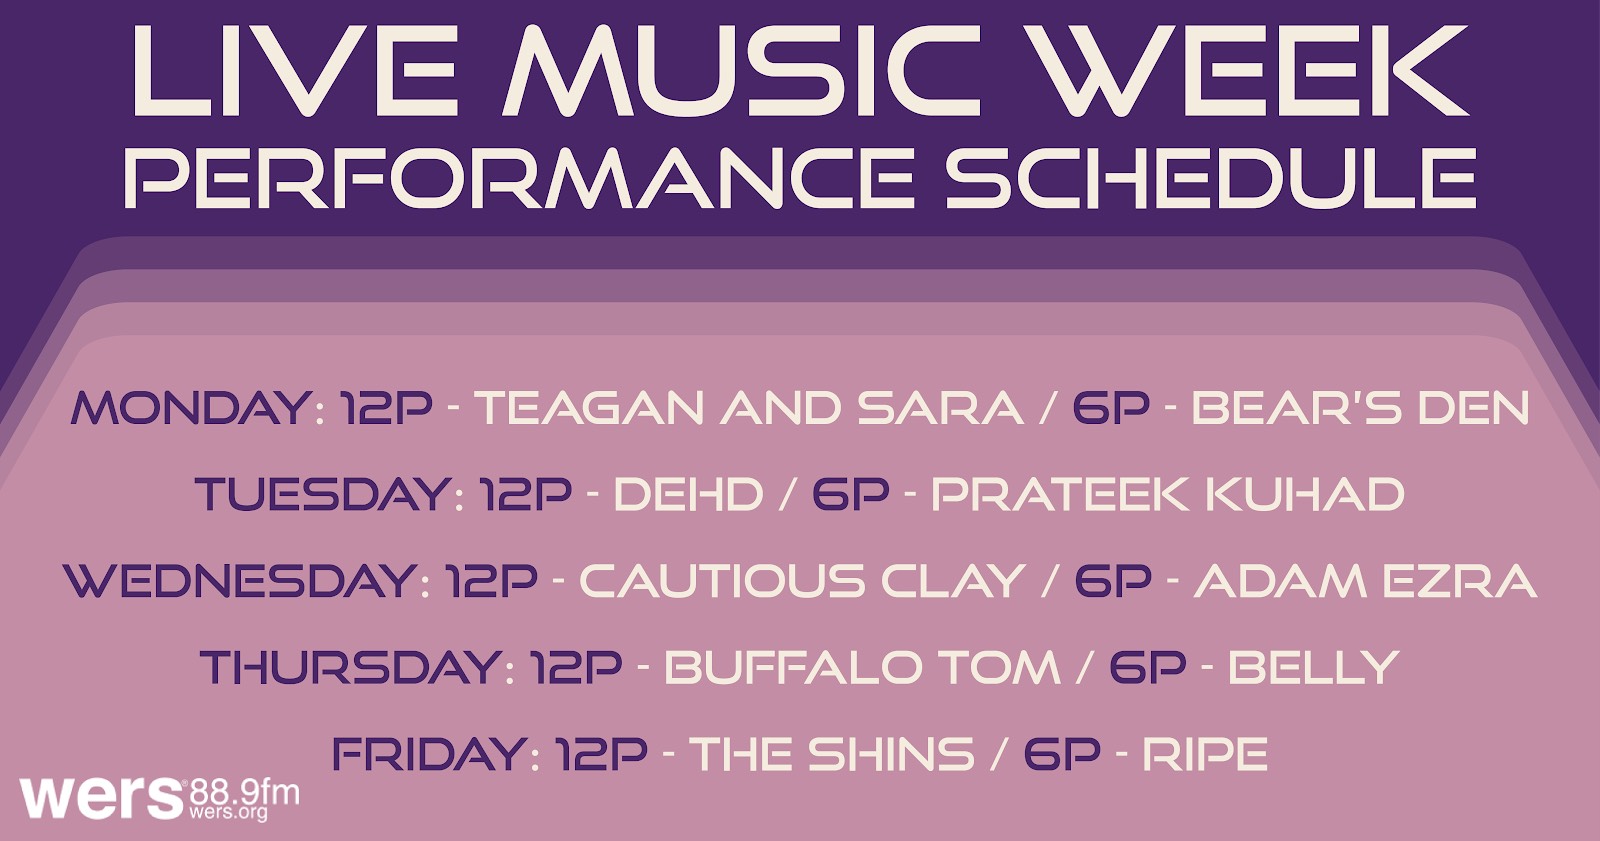 Live Music Week Fall 2022 - WERS 88.9FM - Lineup of live performances, live sessions